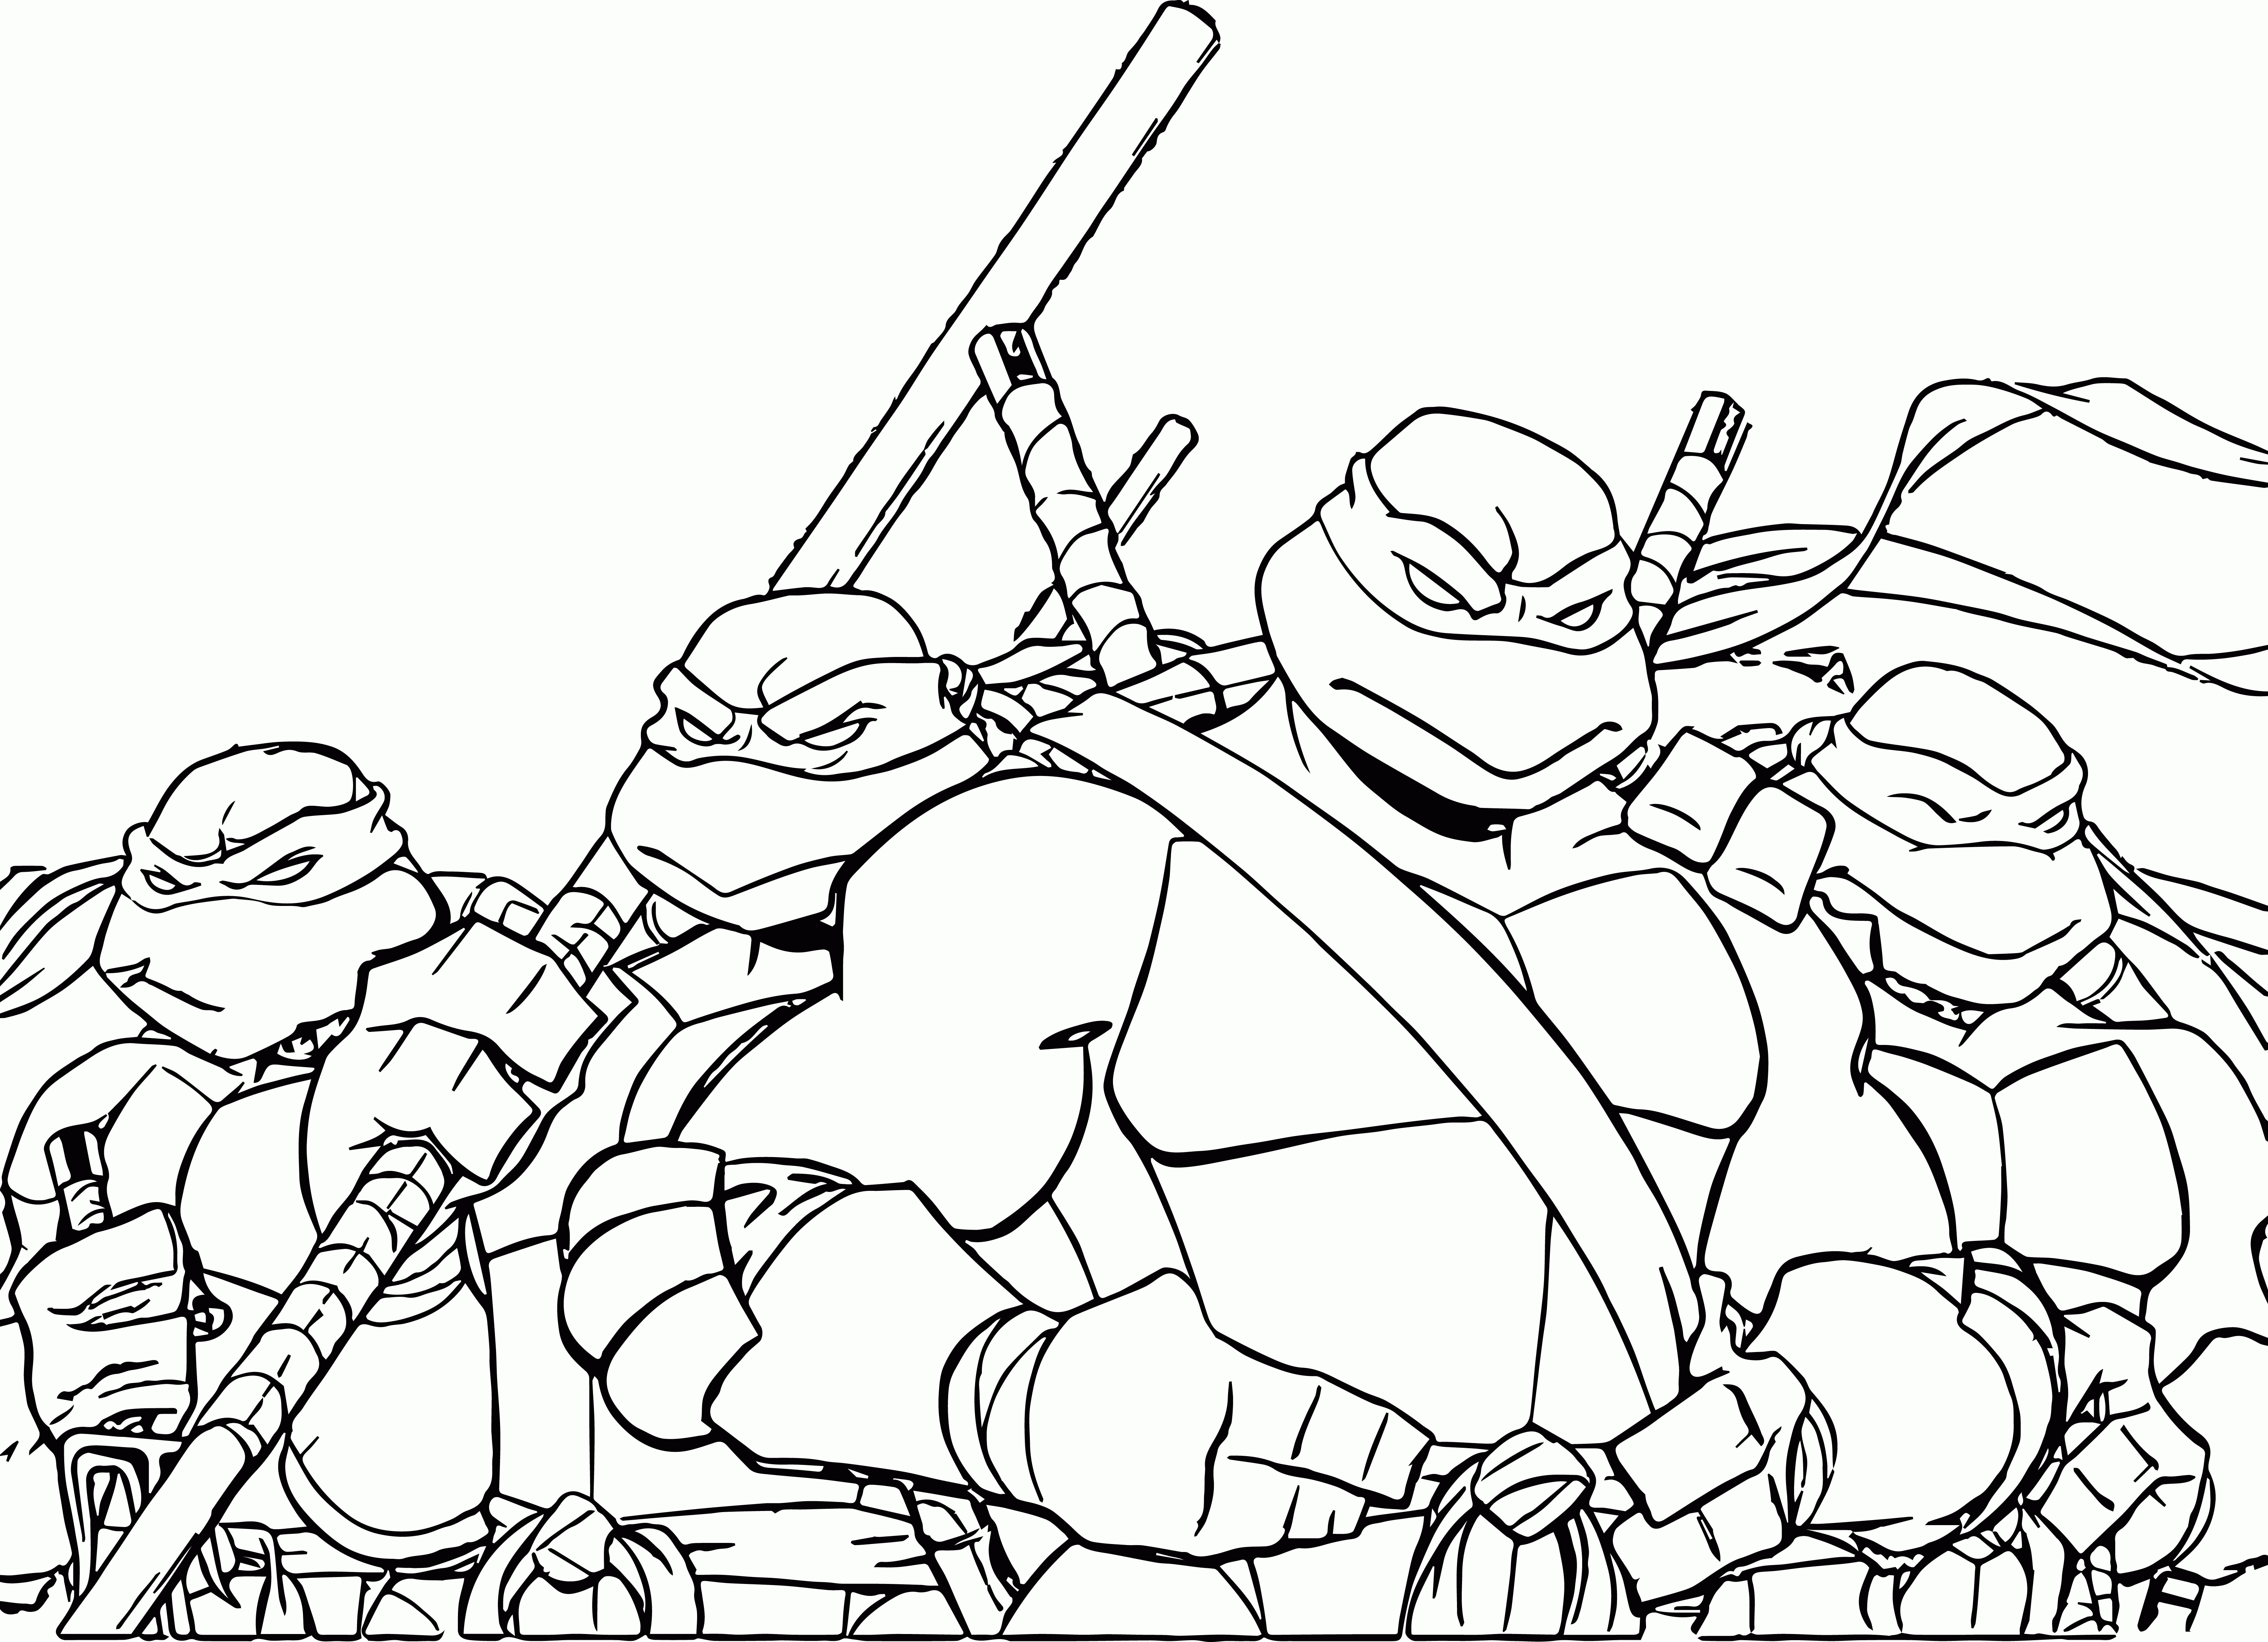 Ninja Turtles Cartoon Pictures Coloring Pages | Wecoloringpage